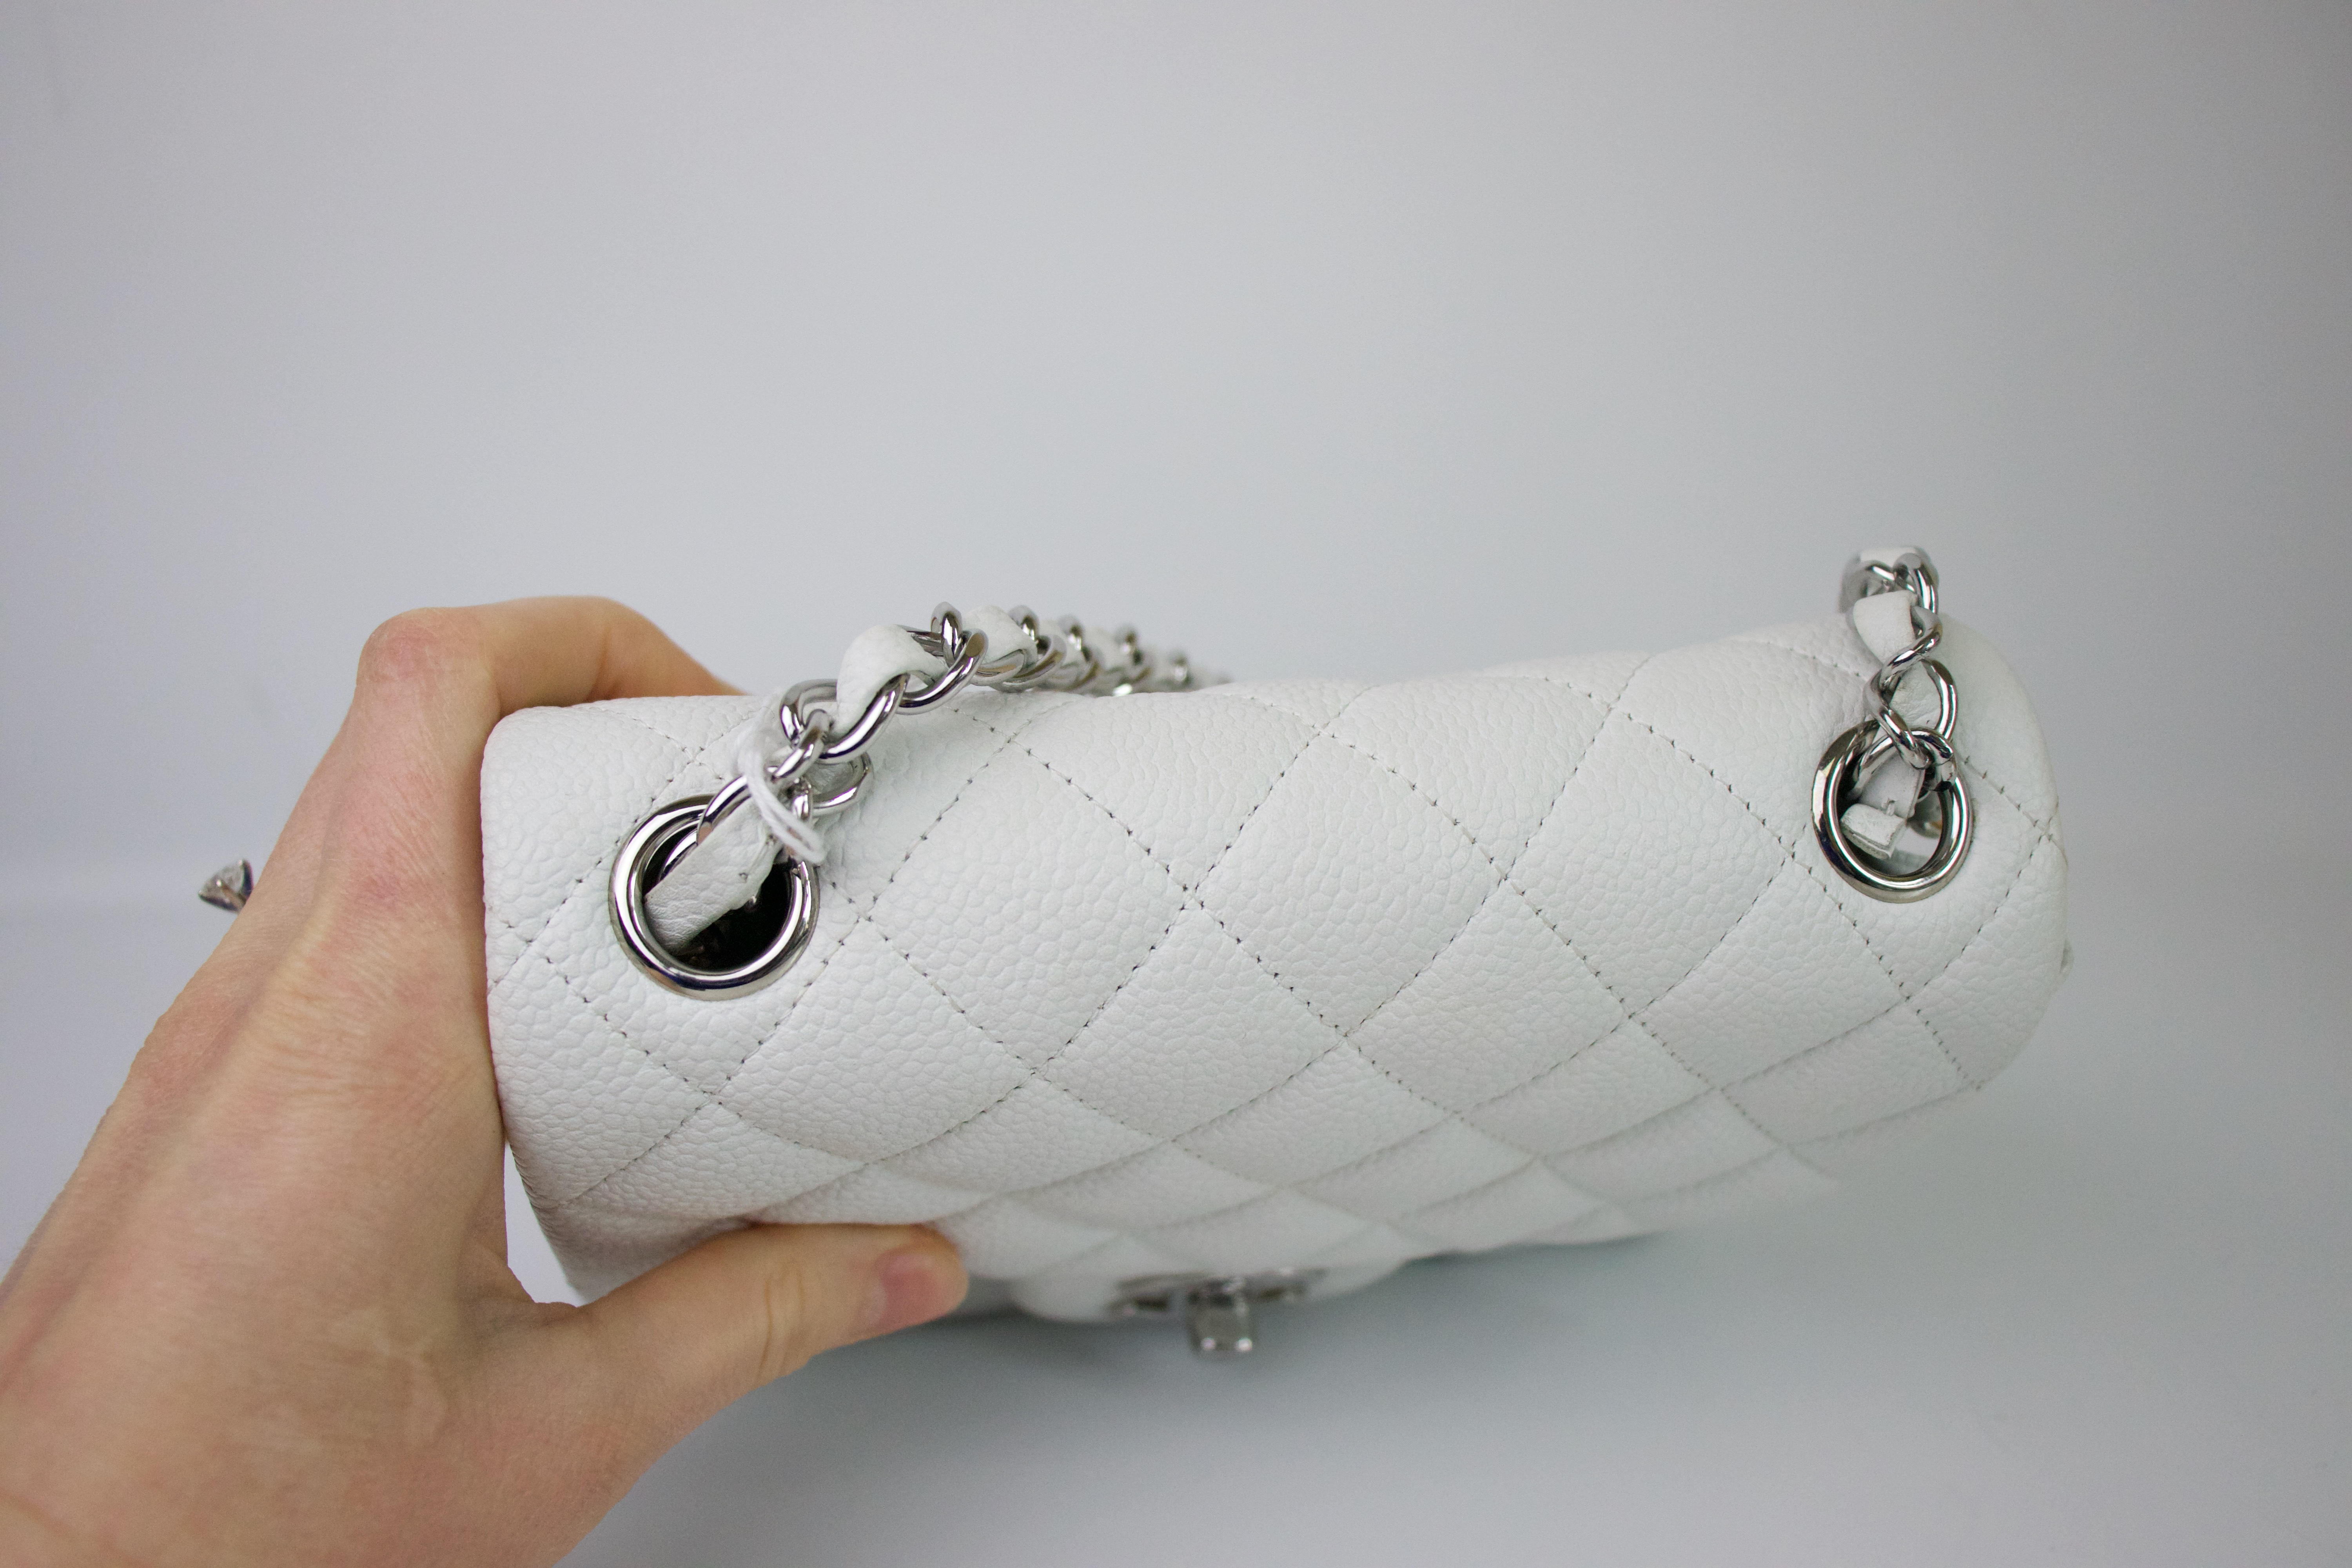 Chanel White Quilted Caviar Leather Flap Bag with Silver Hardware., Lot  #58057